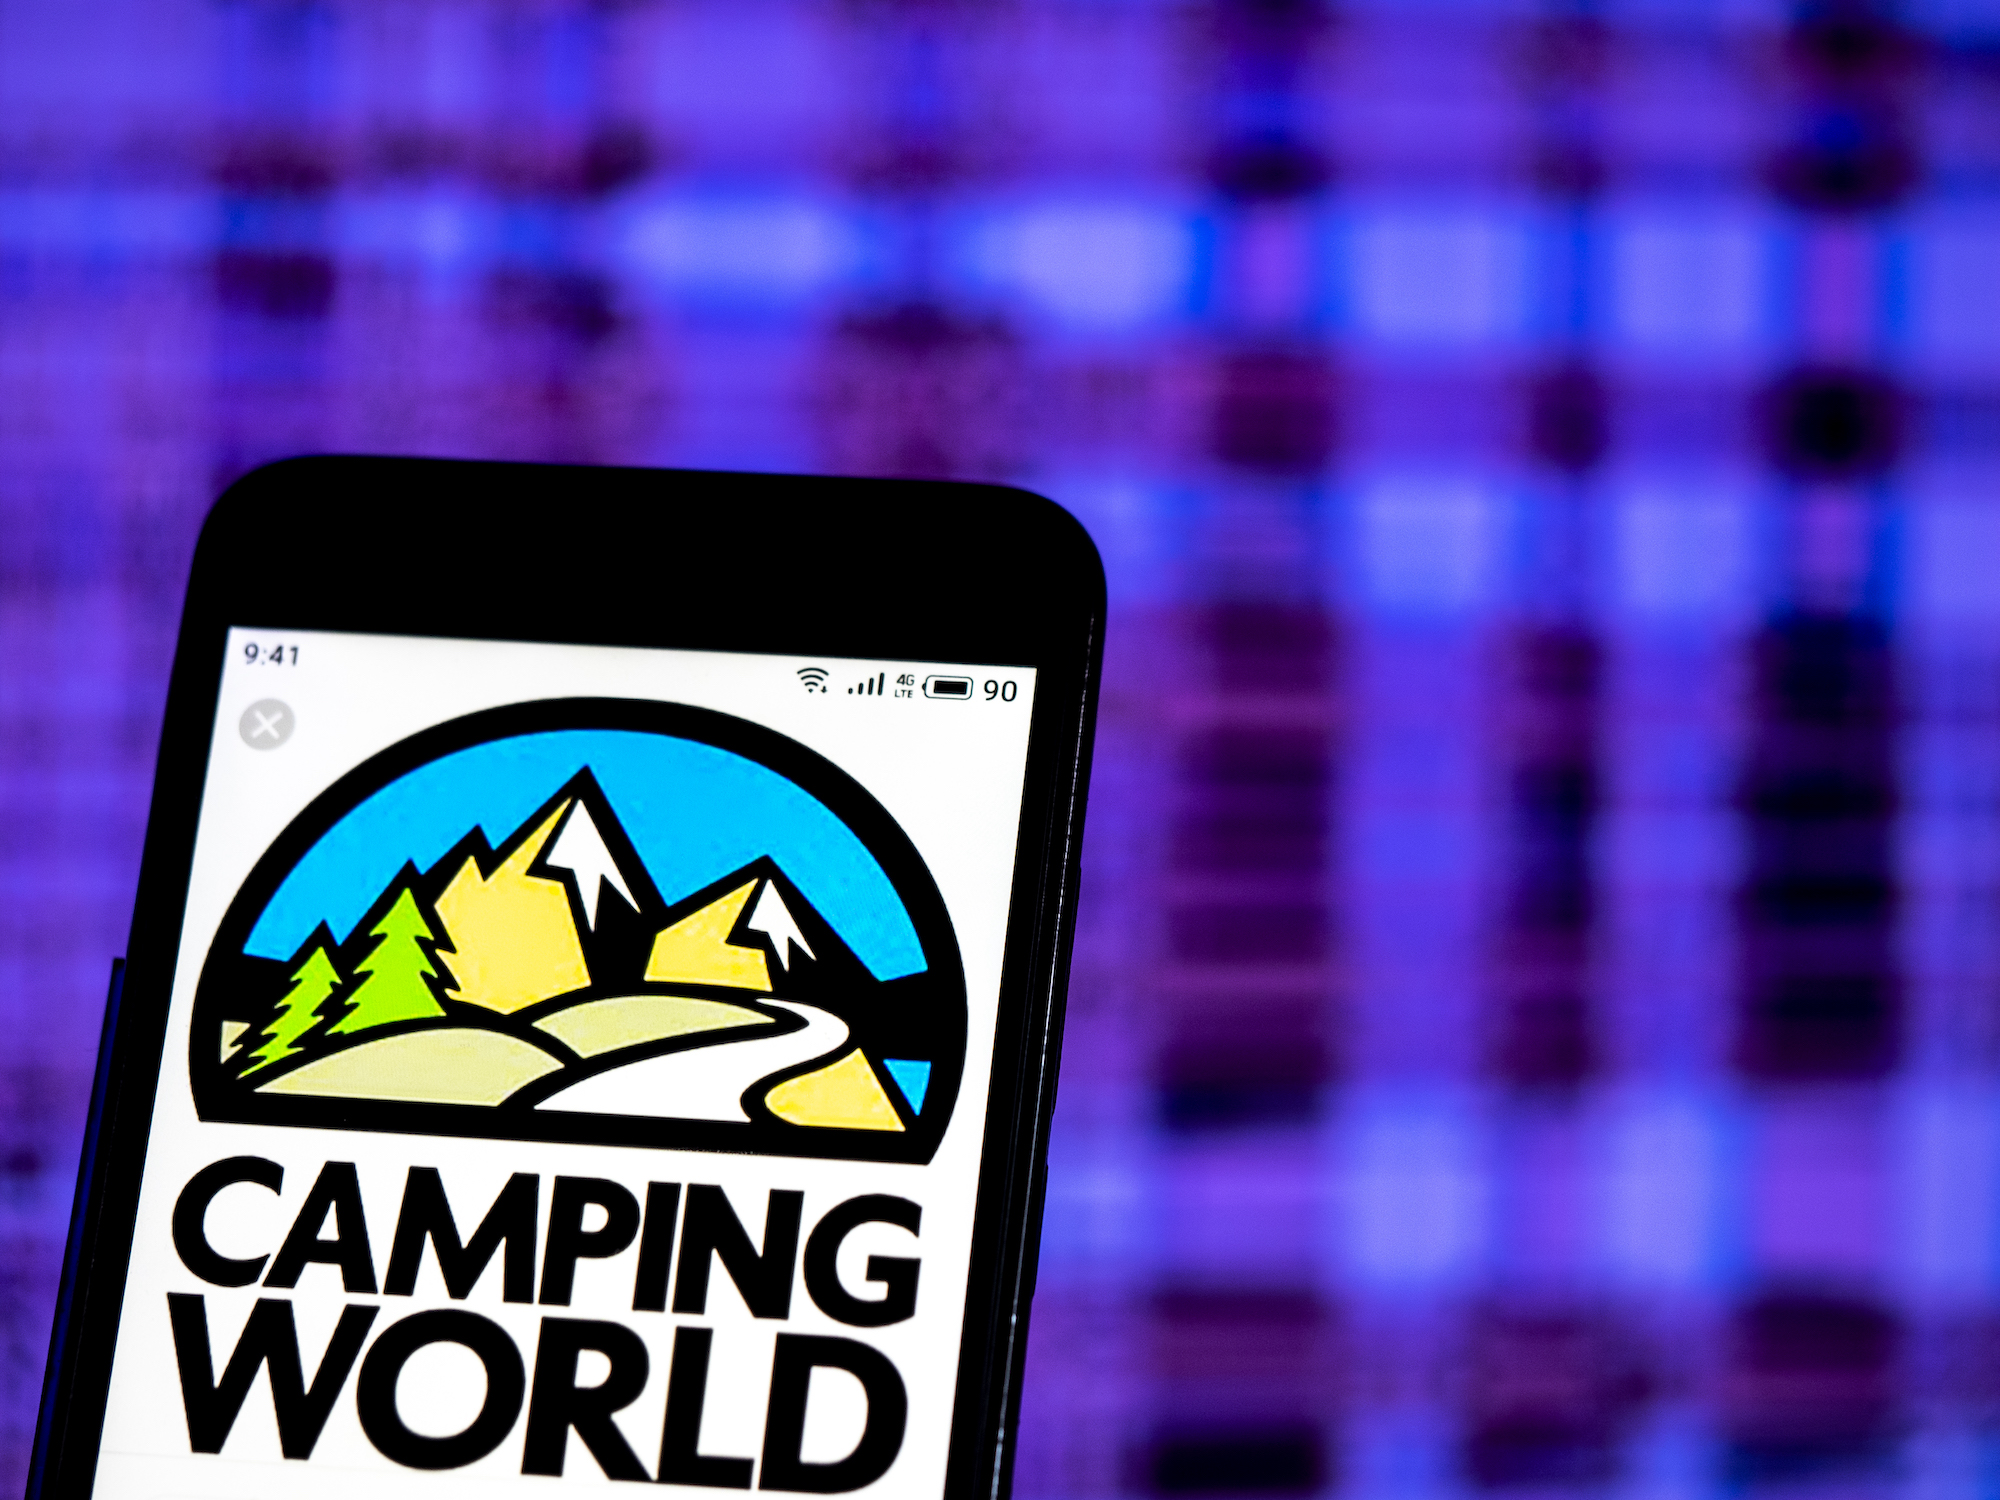 The Camping World logo displayed on a smartphone